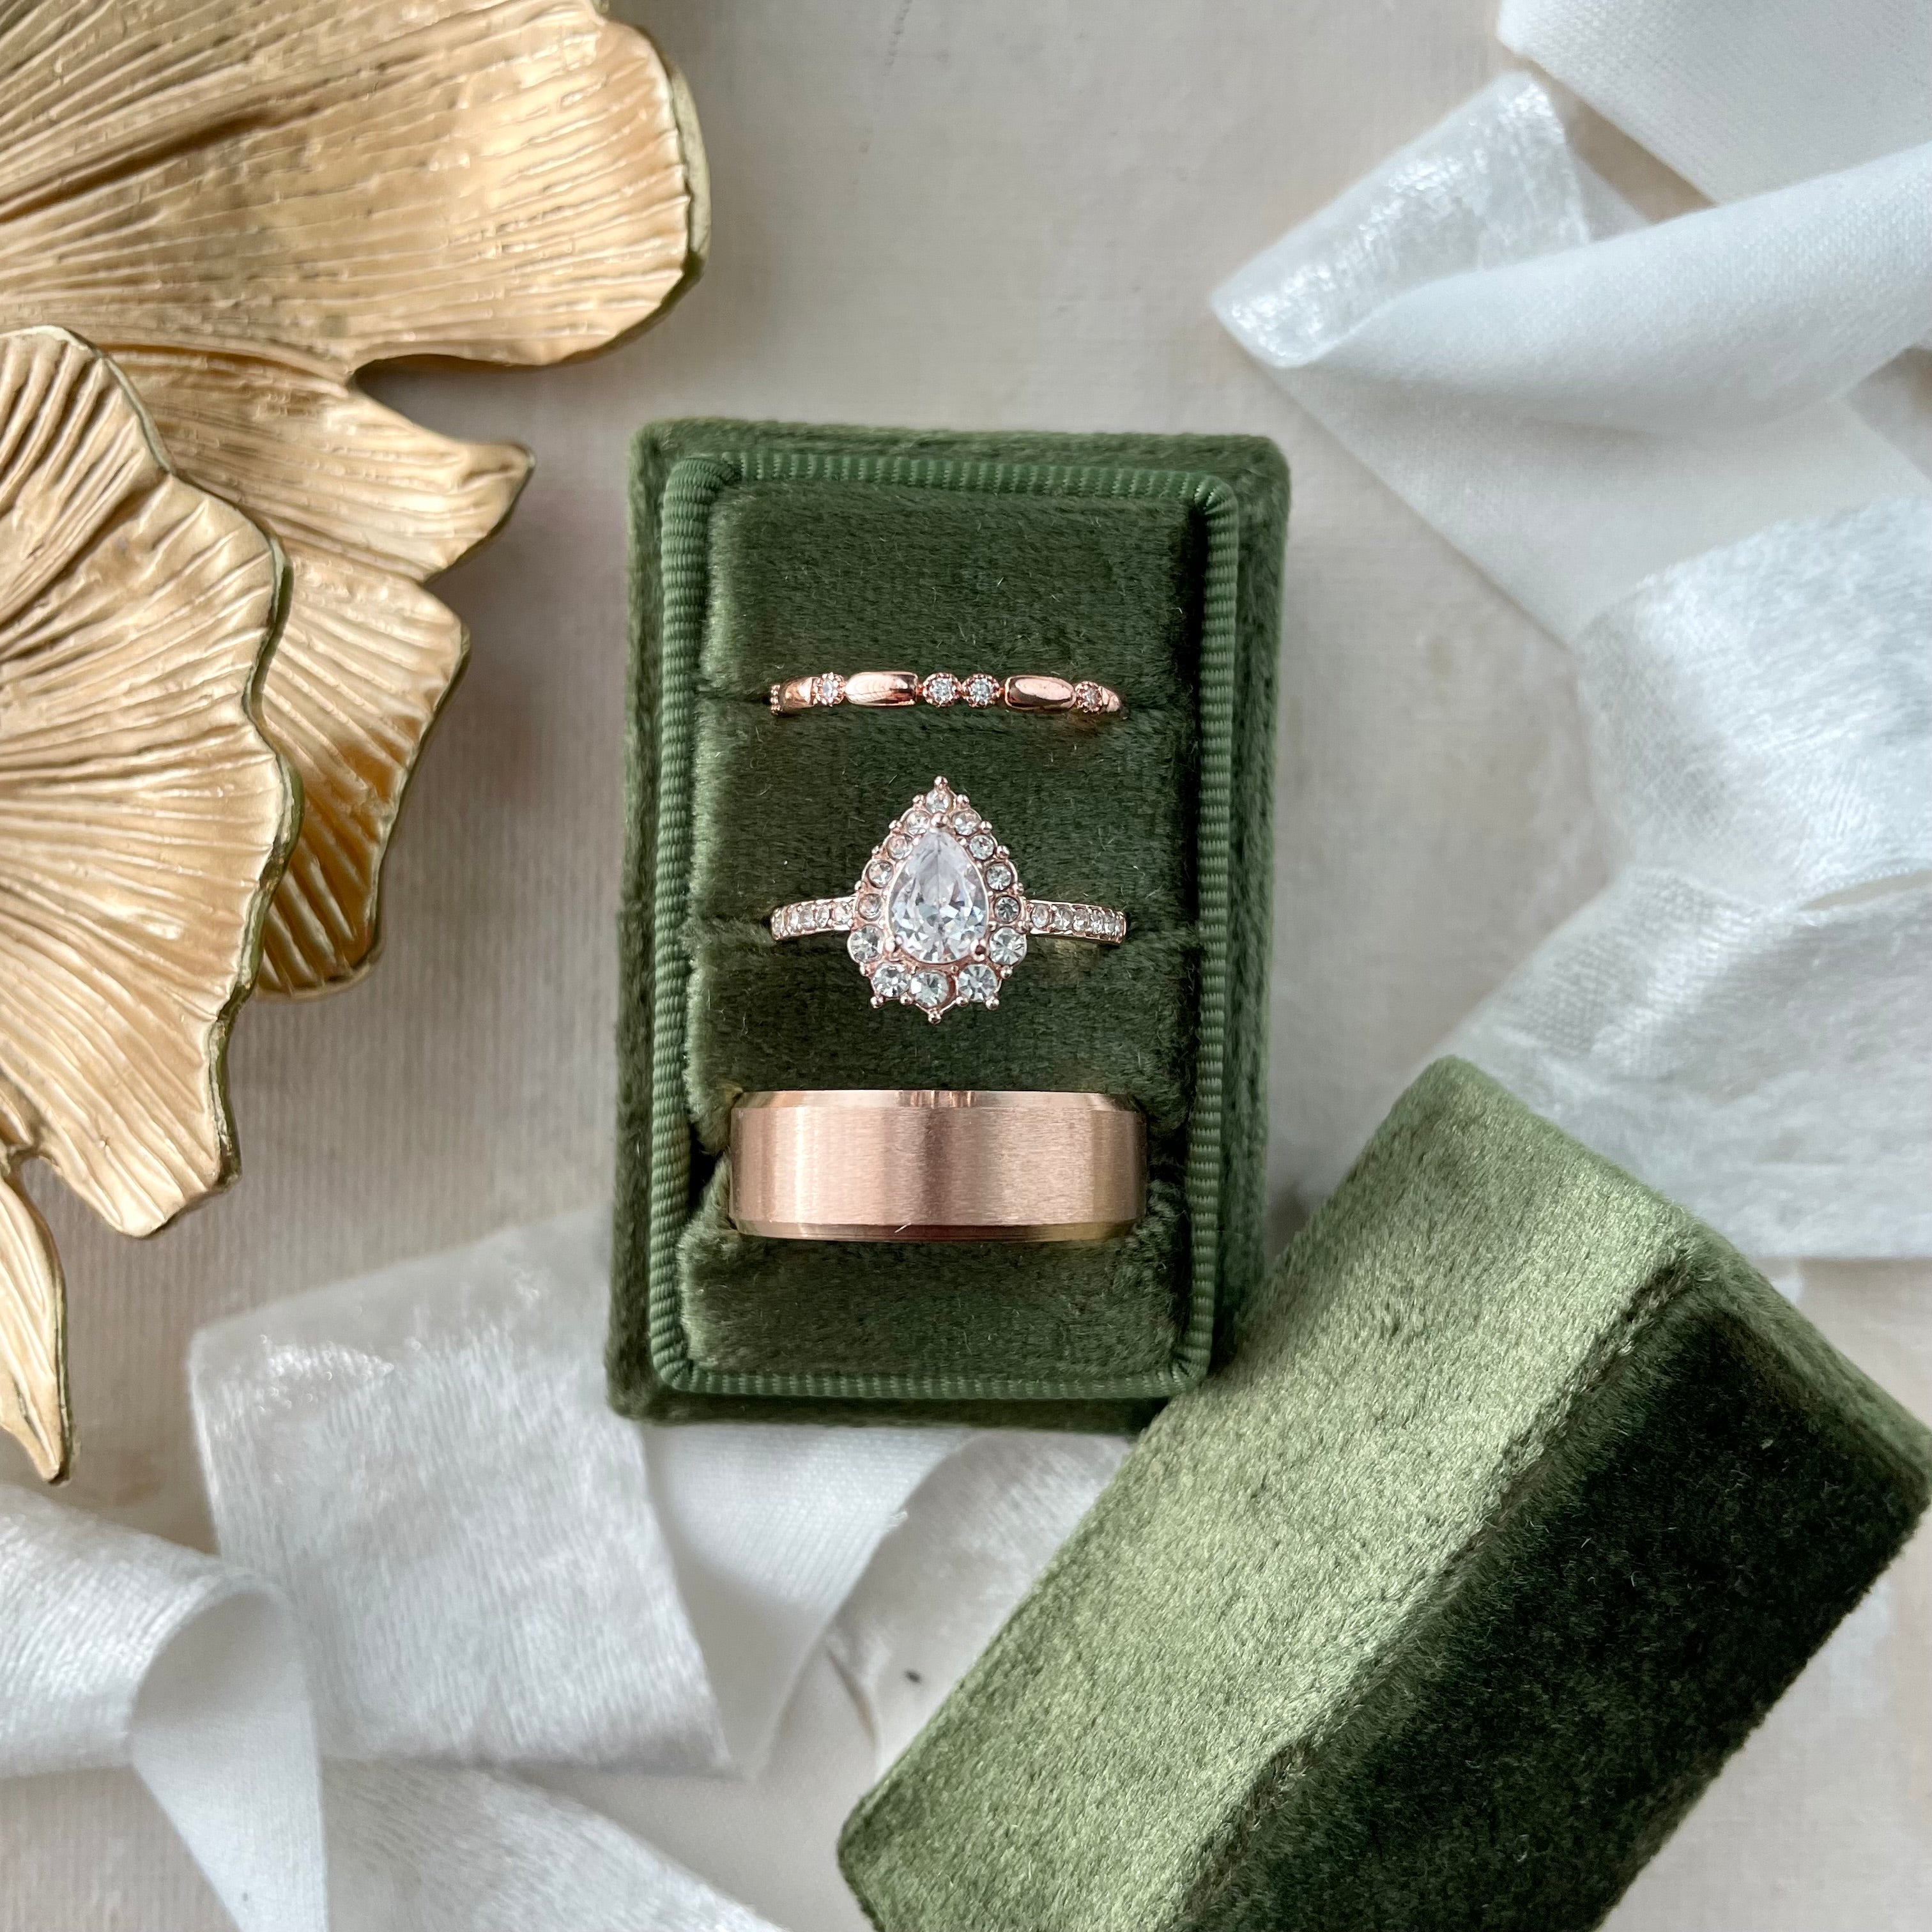 Olive Green tripe slot ring box styled with white ribbon and gold leaf dish - Wedding Flat lay props from Champagne & GRIT